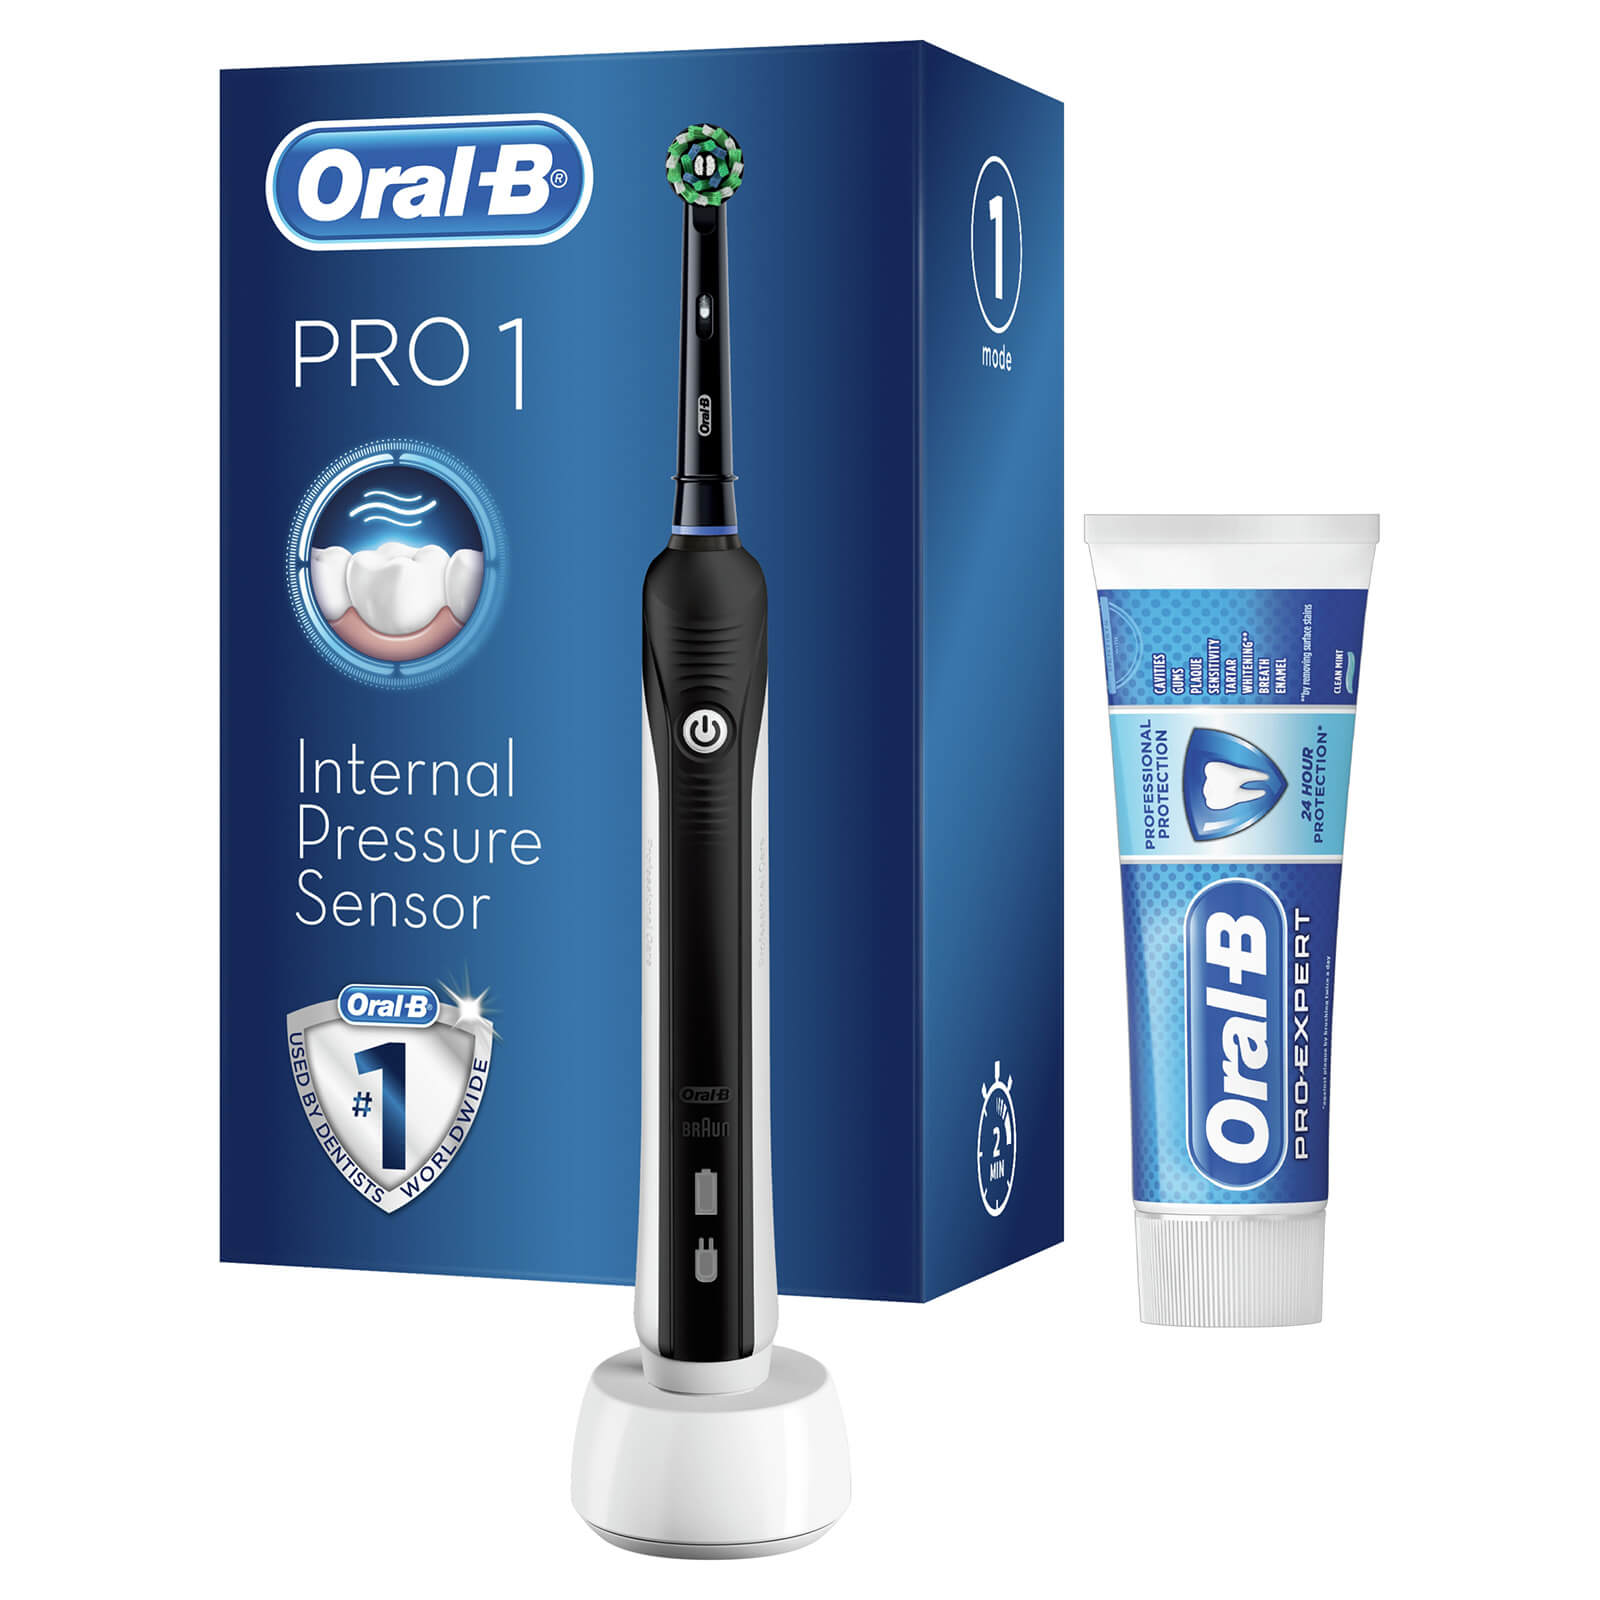 Oral-B Pro 1 650 Electric Toothbrush and Toothpaste – Black lookfantastic.com imagine